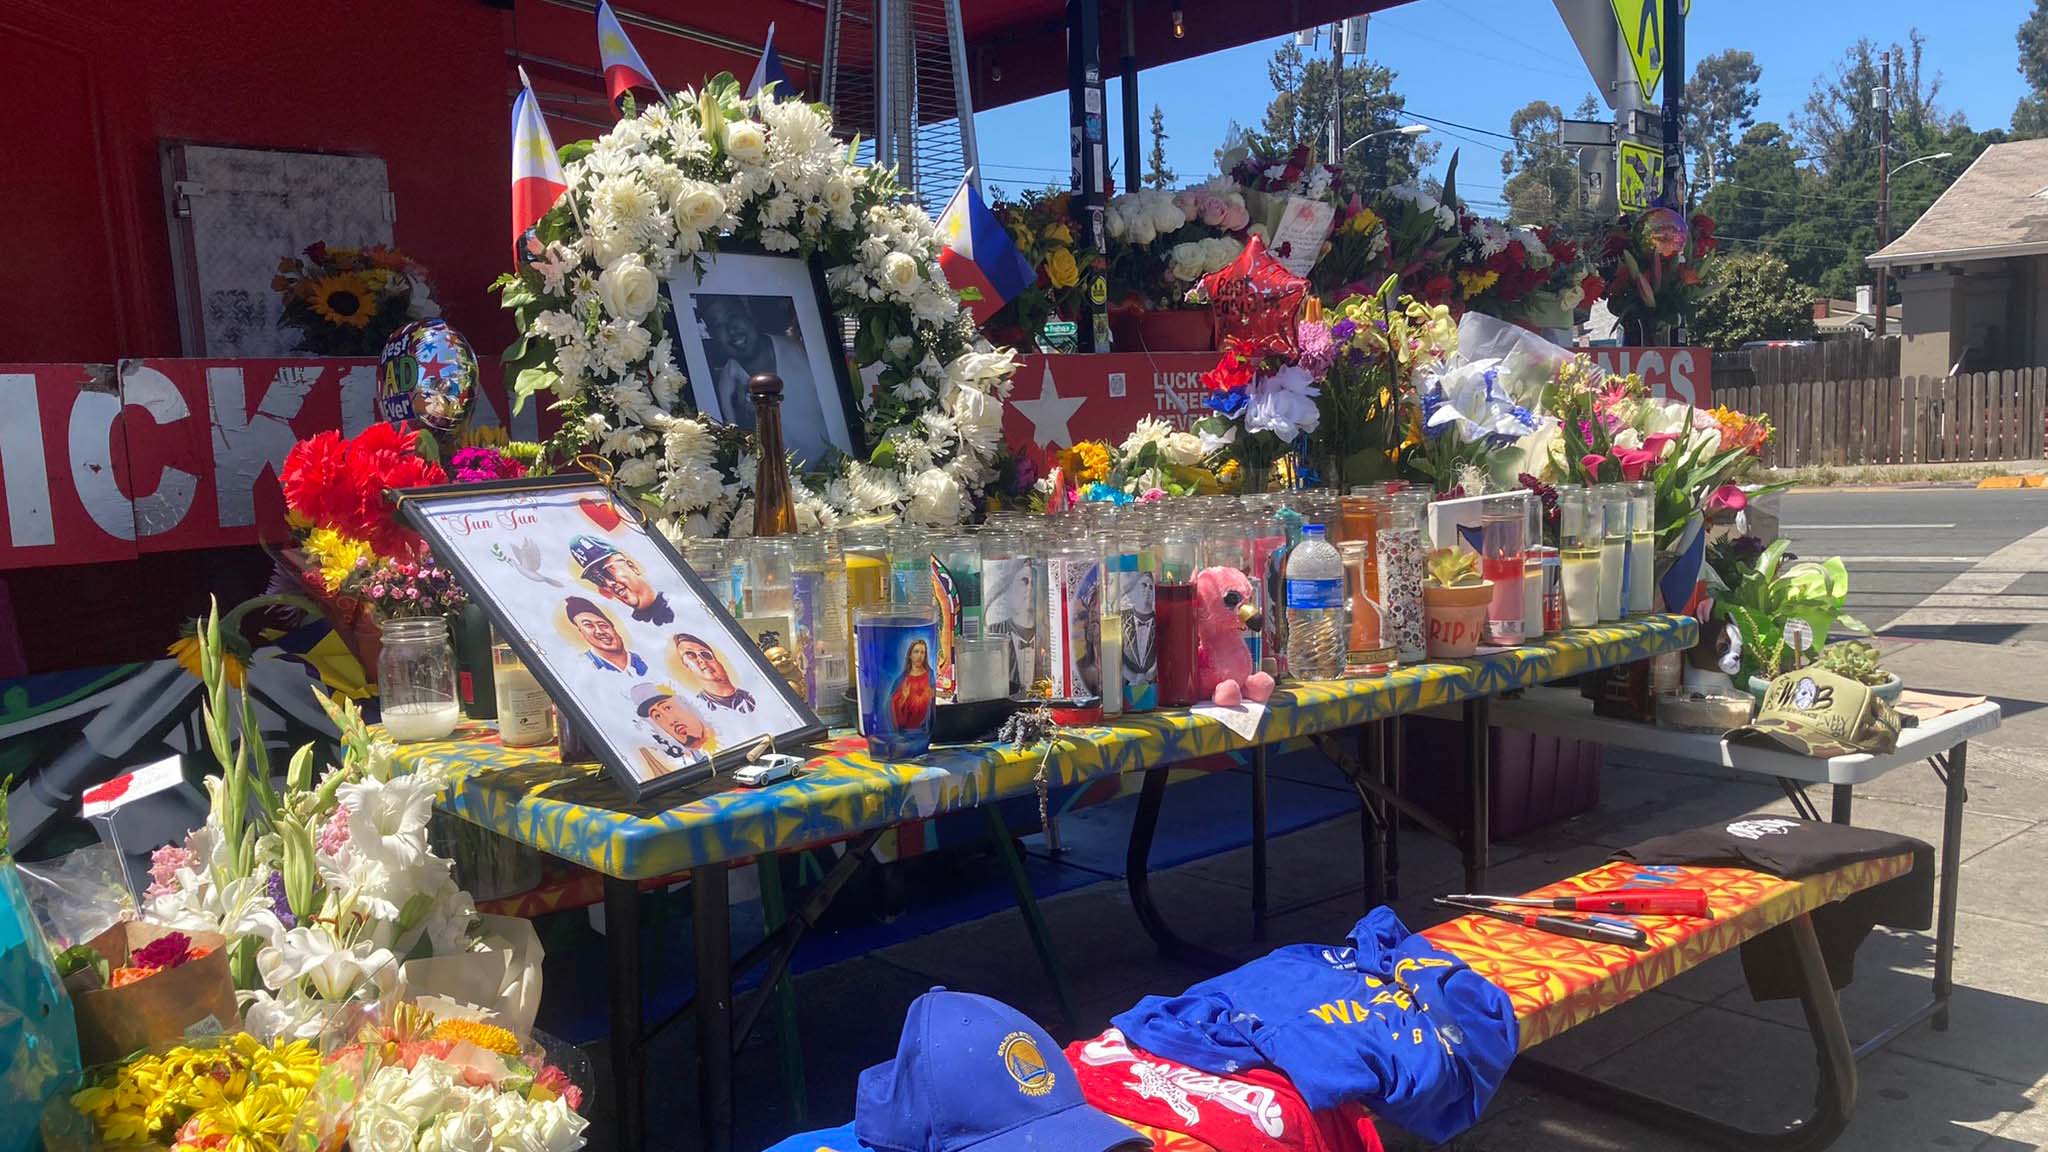 A memorial to Jun Anaba, with flowers, candles and photos, set up outside Lucky Three Seven restaurant.